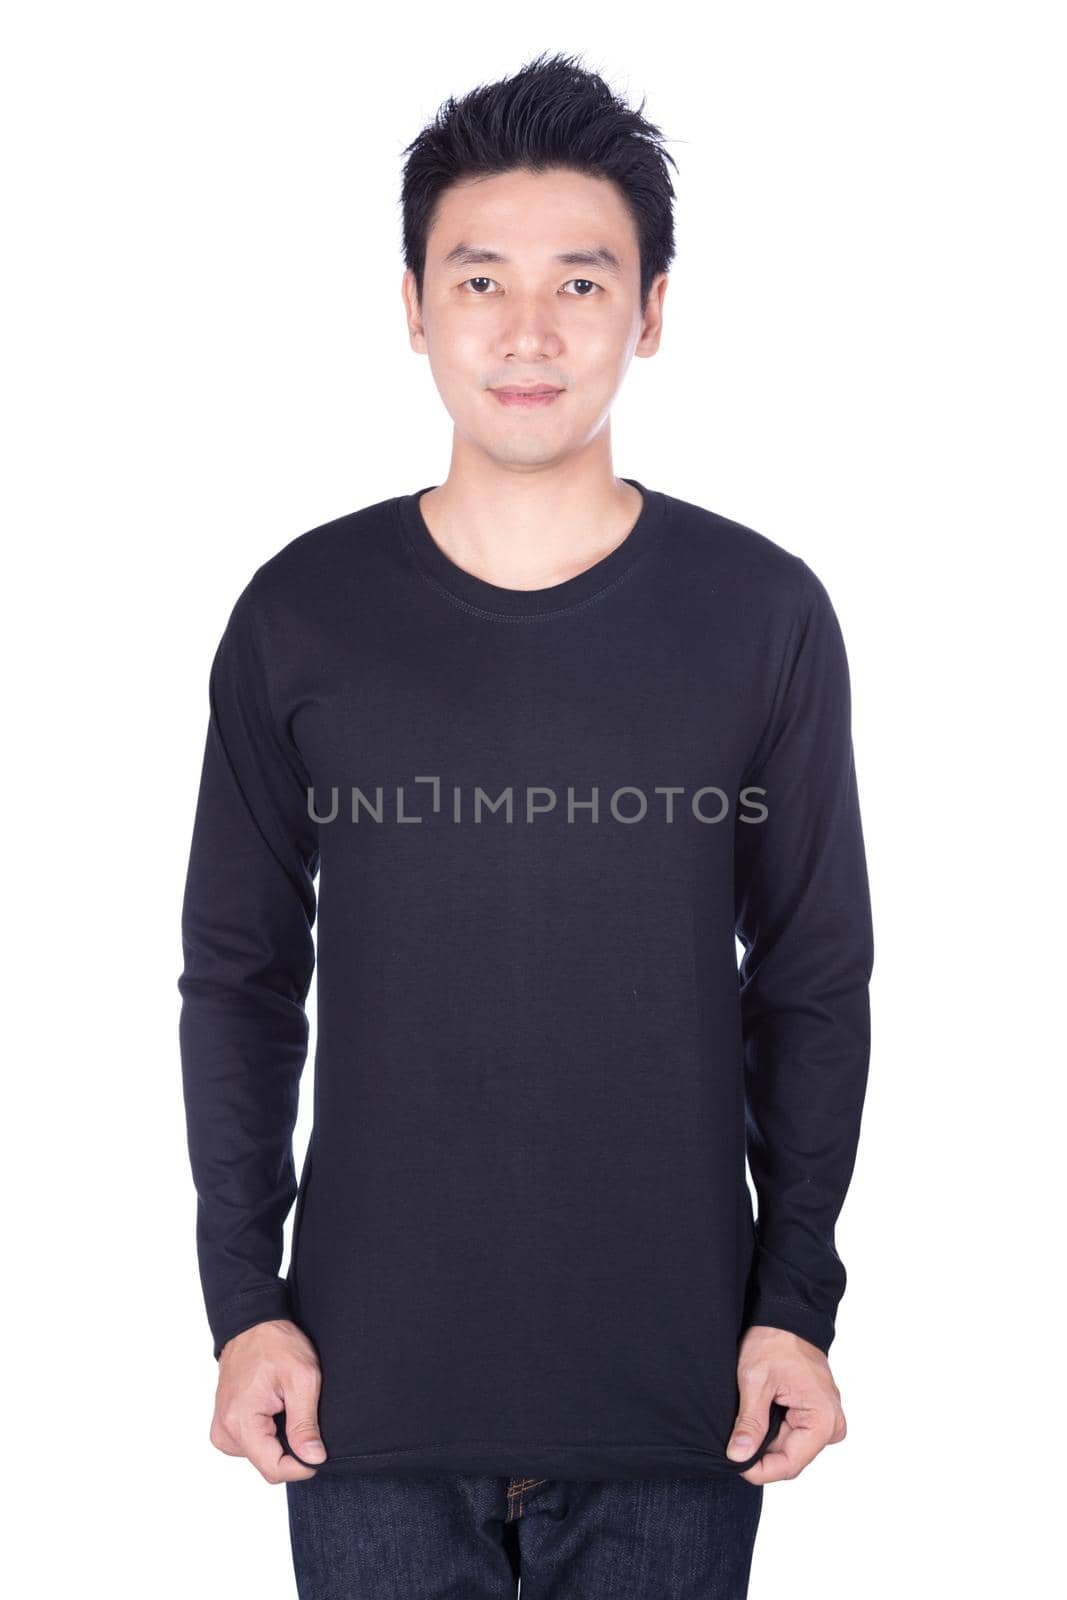 happy man in black long sleeve t-shirt isolated on a white background